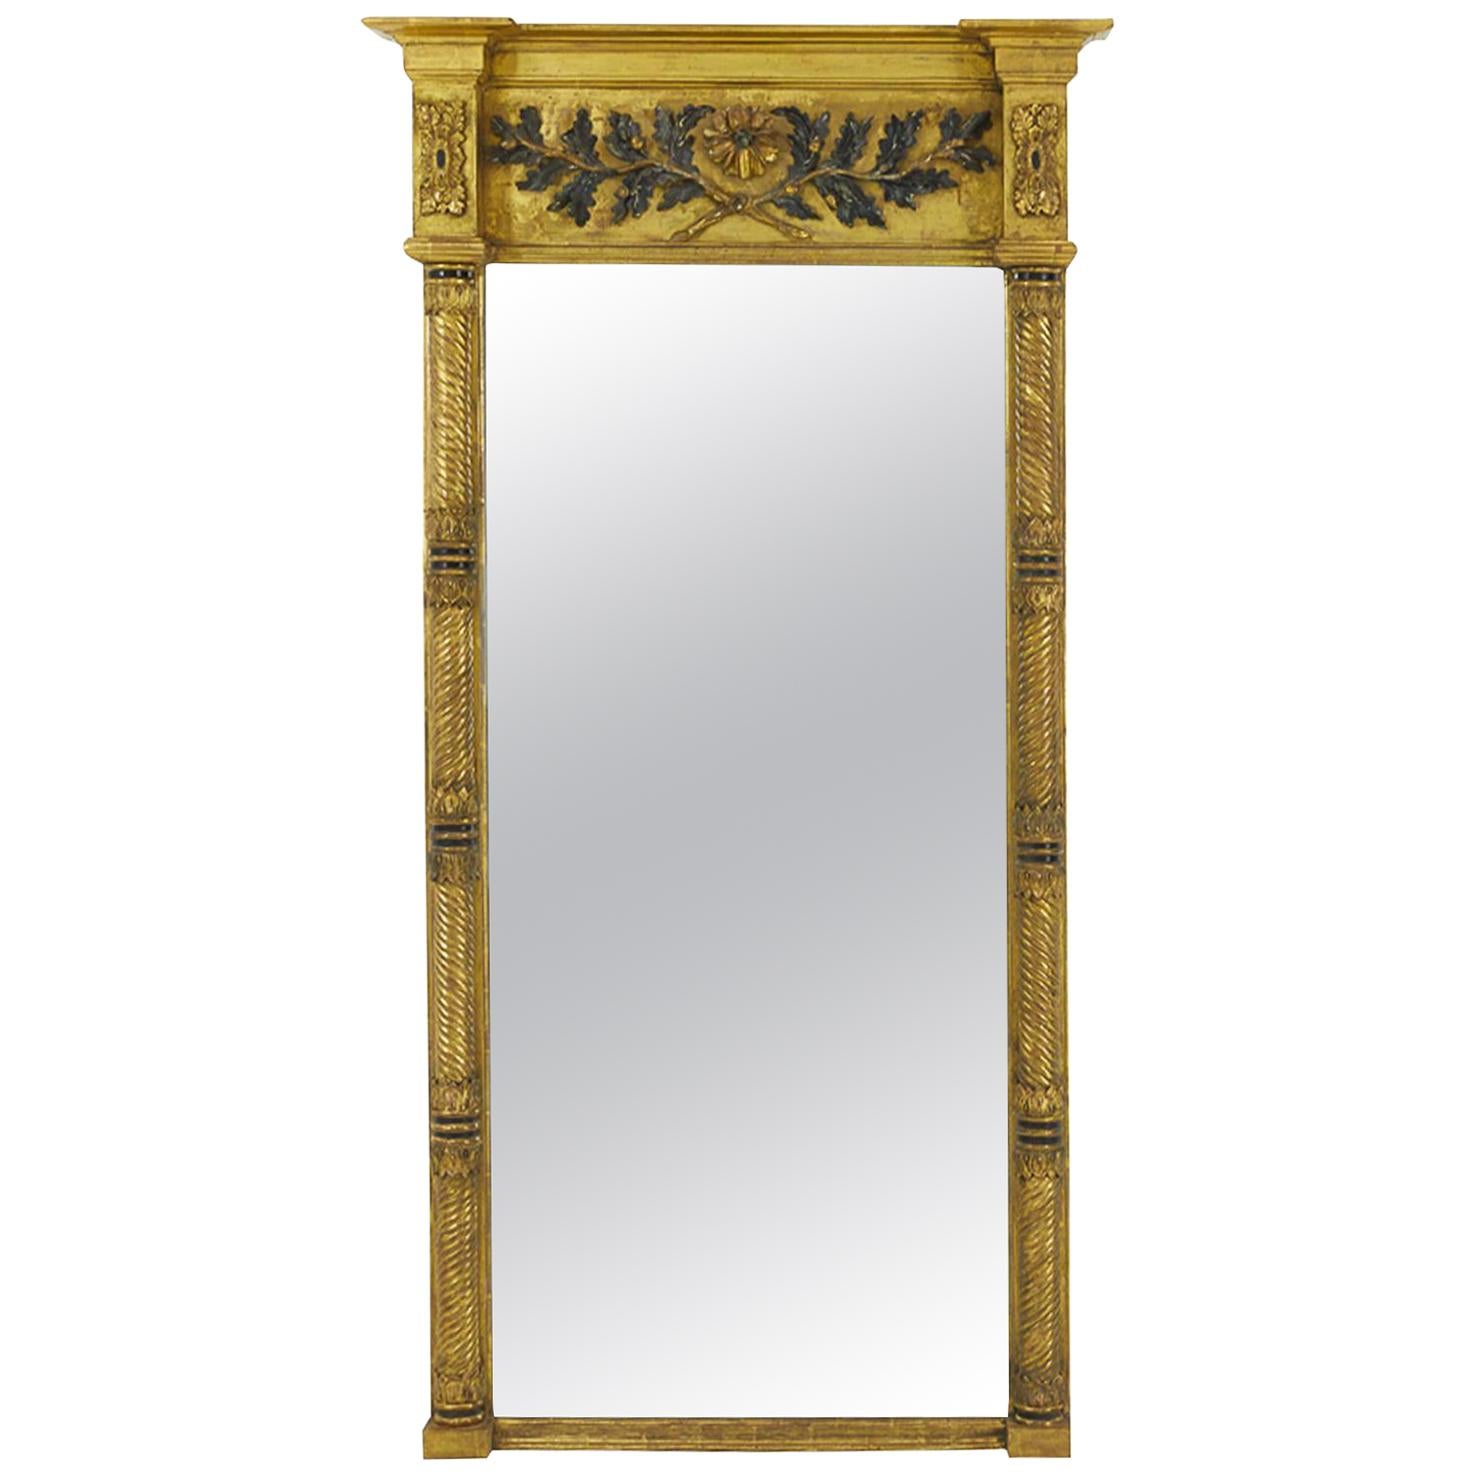 Exceptional Late Regency English Pier Mirror